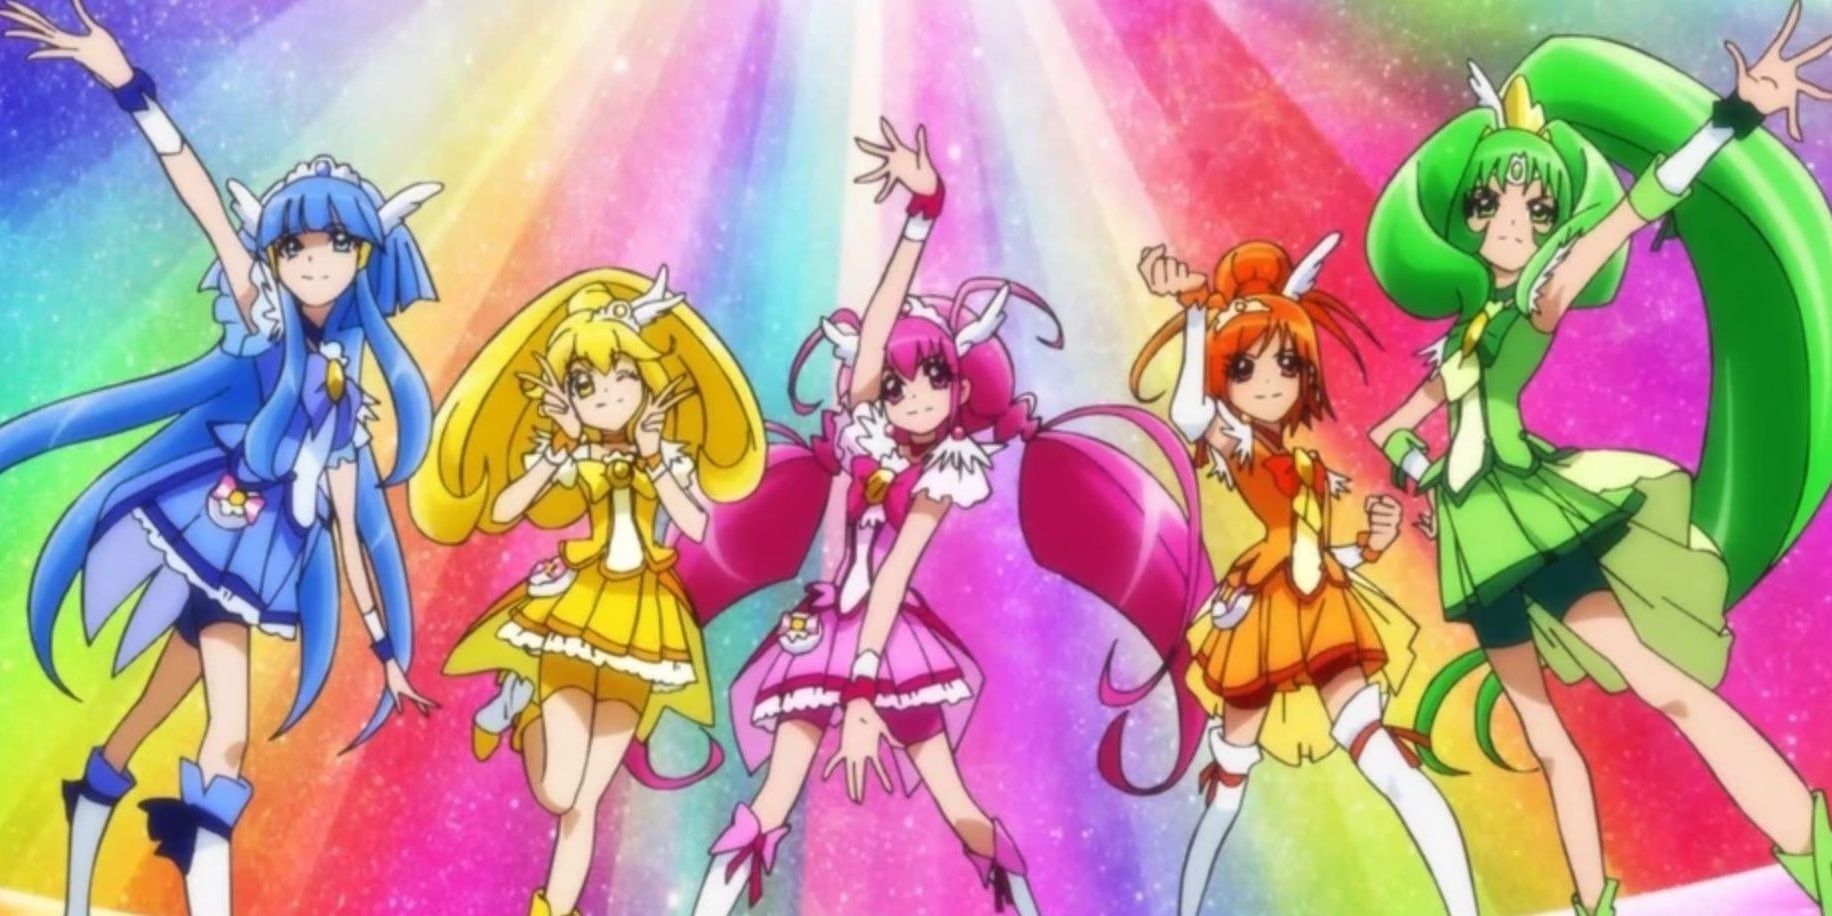 The Glitter Force after their magical girl transformation